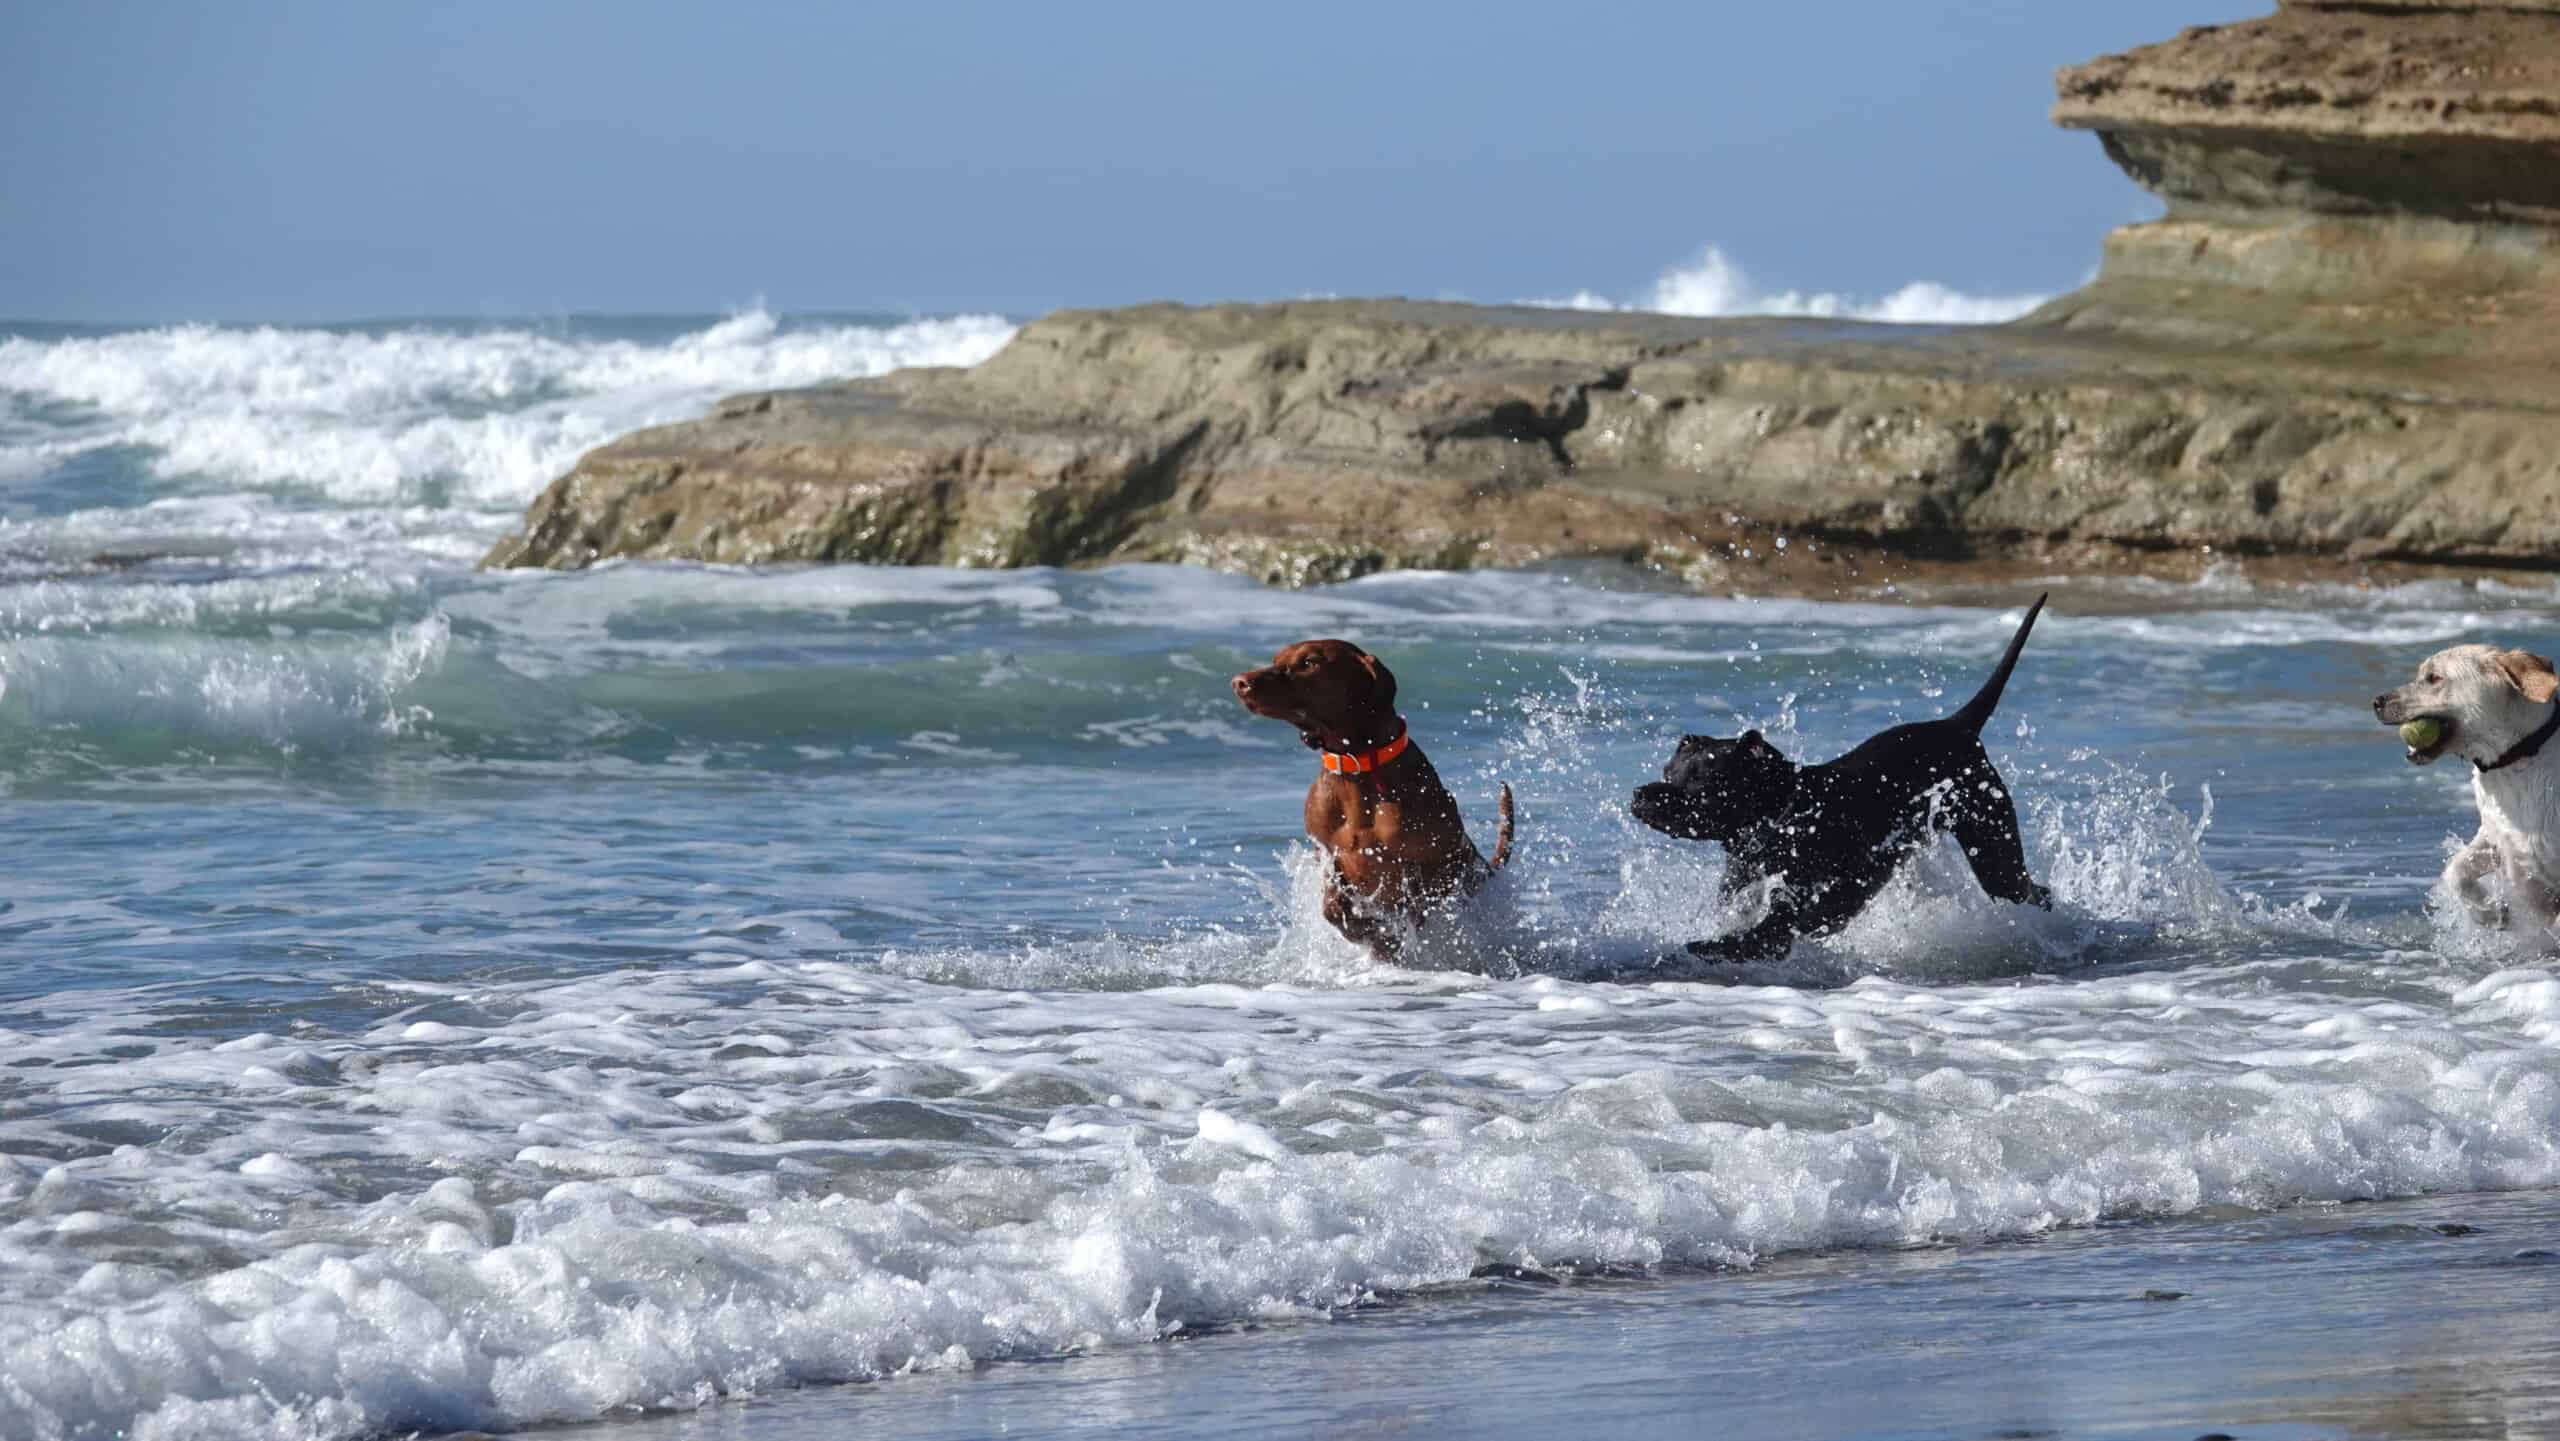 Three off-leash dogs frolicking at the beach.